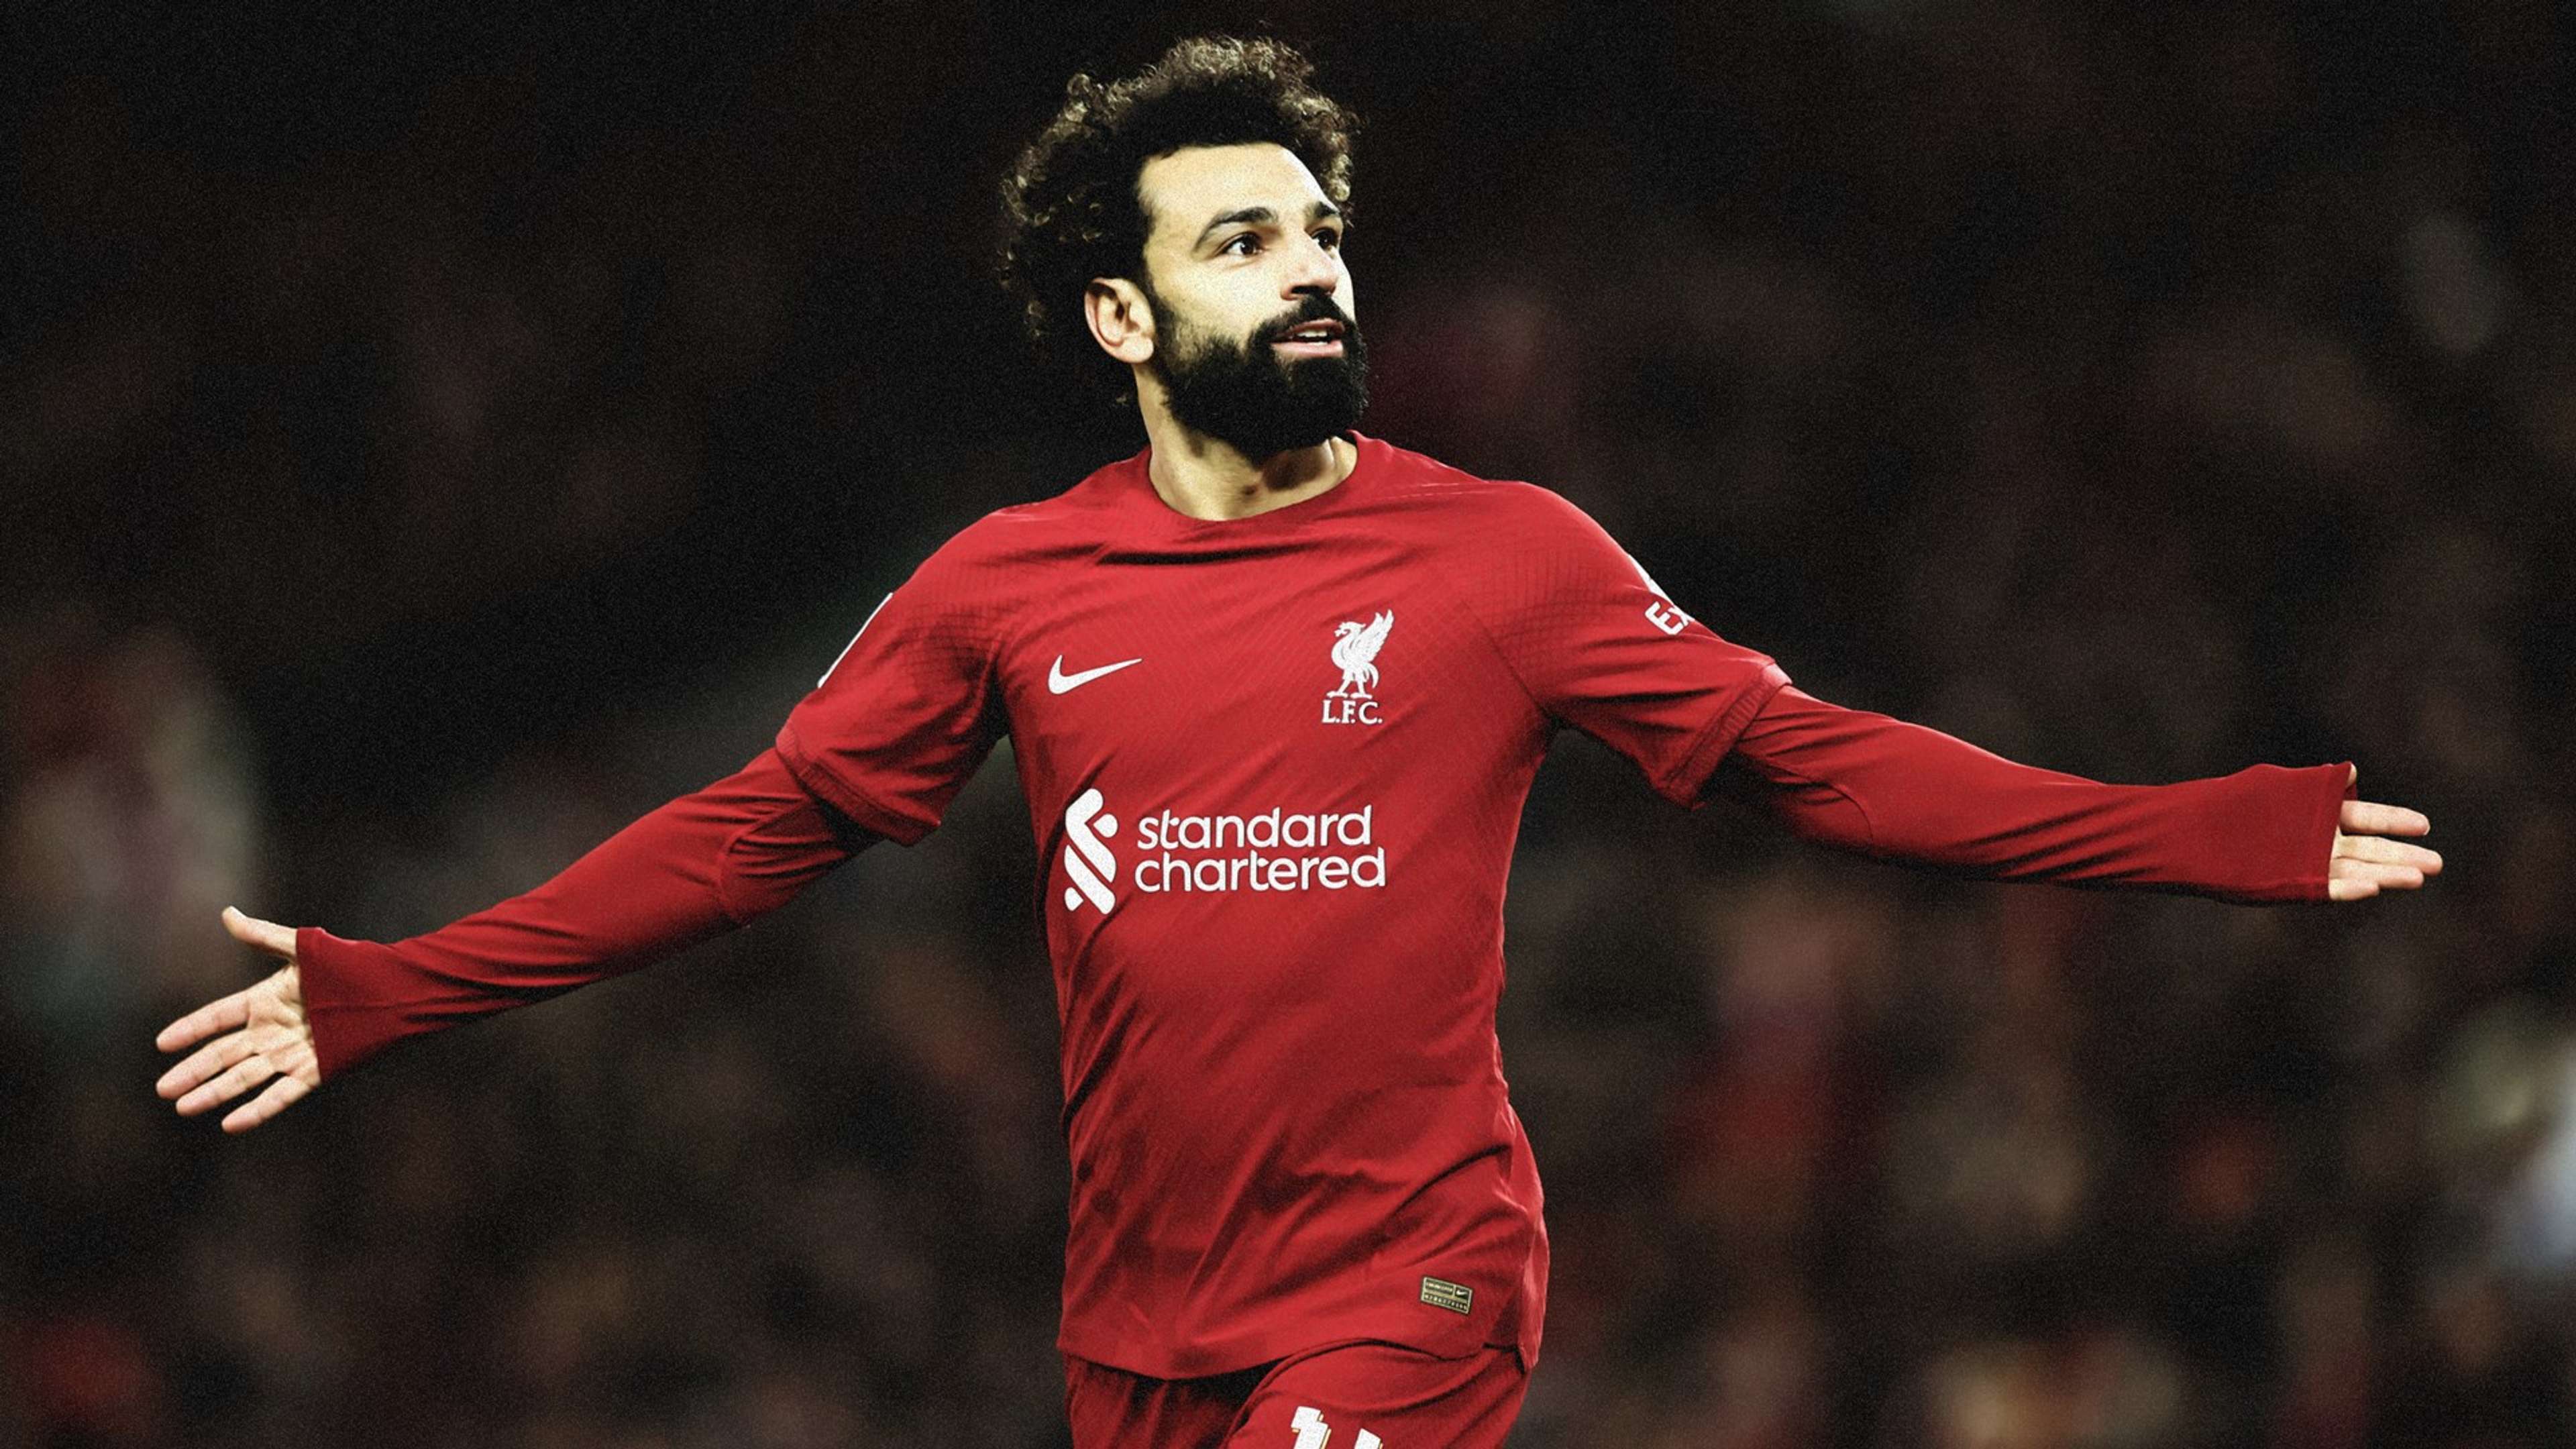 Liverpool legend names the one player whose departure would be a 'bigger blow' than Salah - Background information on the player